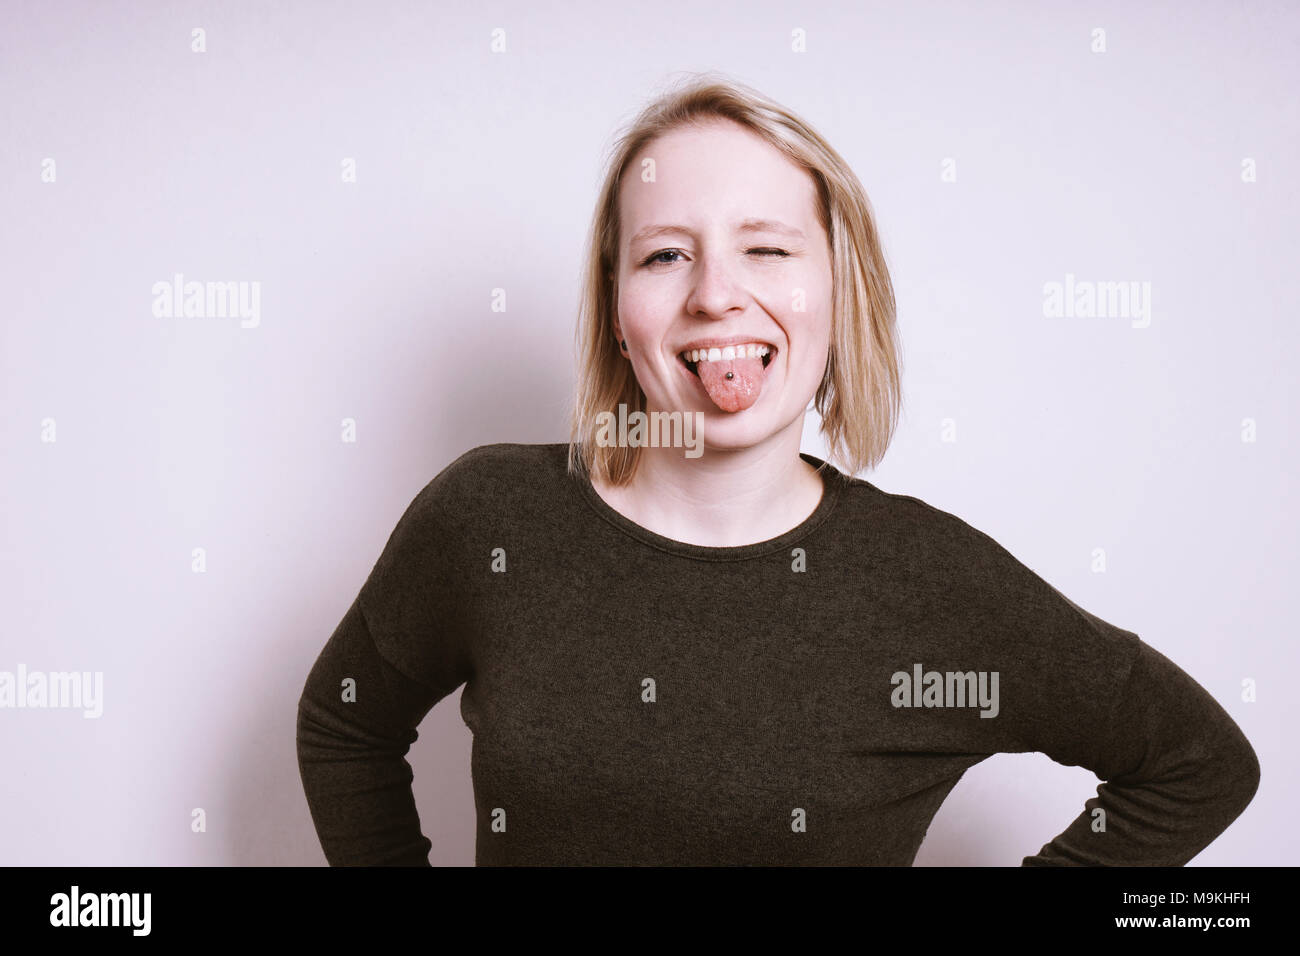 silly young woman sticking out tongue and winking Stock Photo